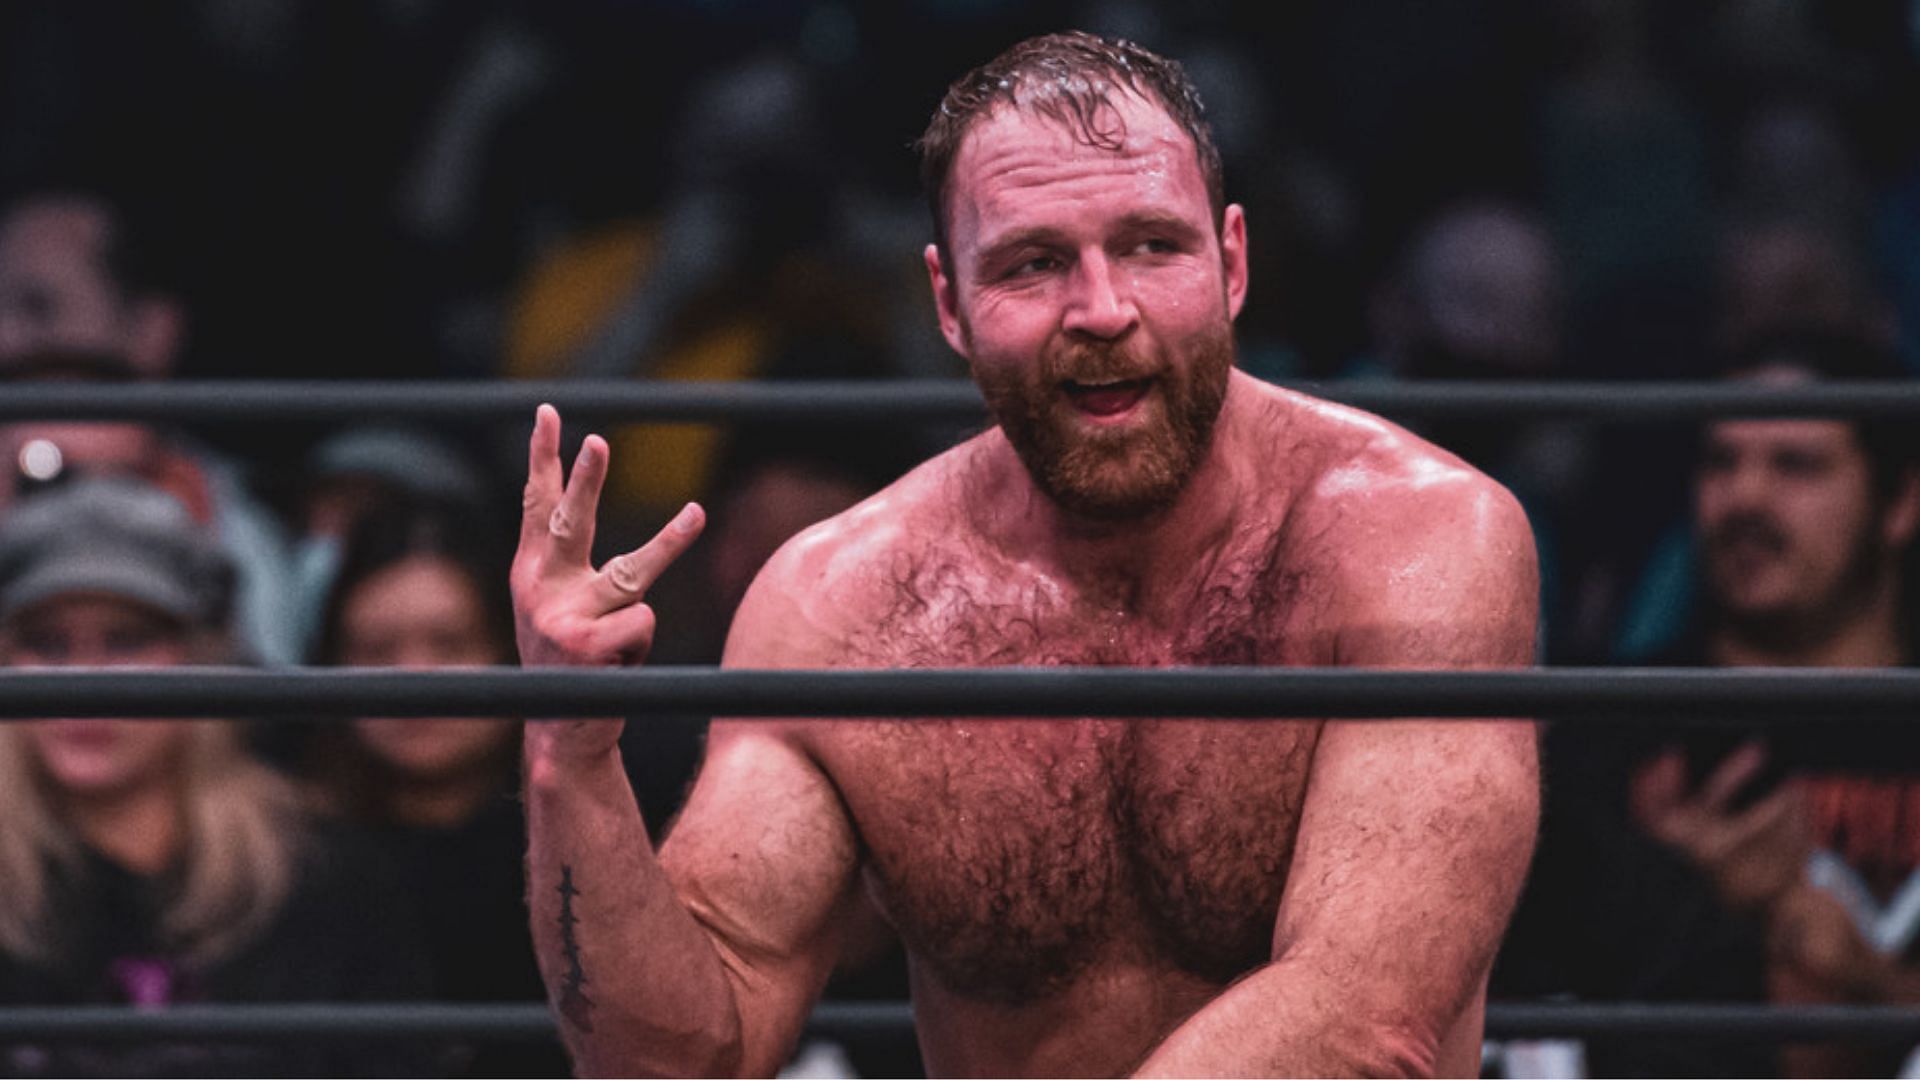 Jon Moxley posing after a match in 2022 (credit: Jay Lee Photography)